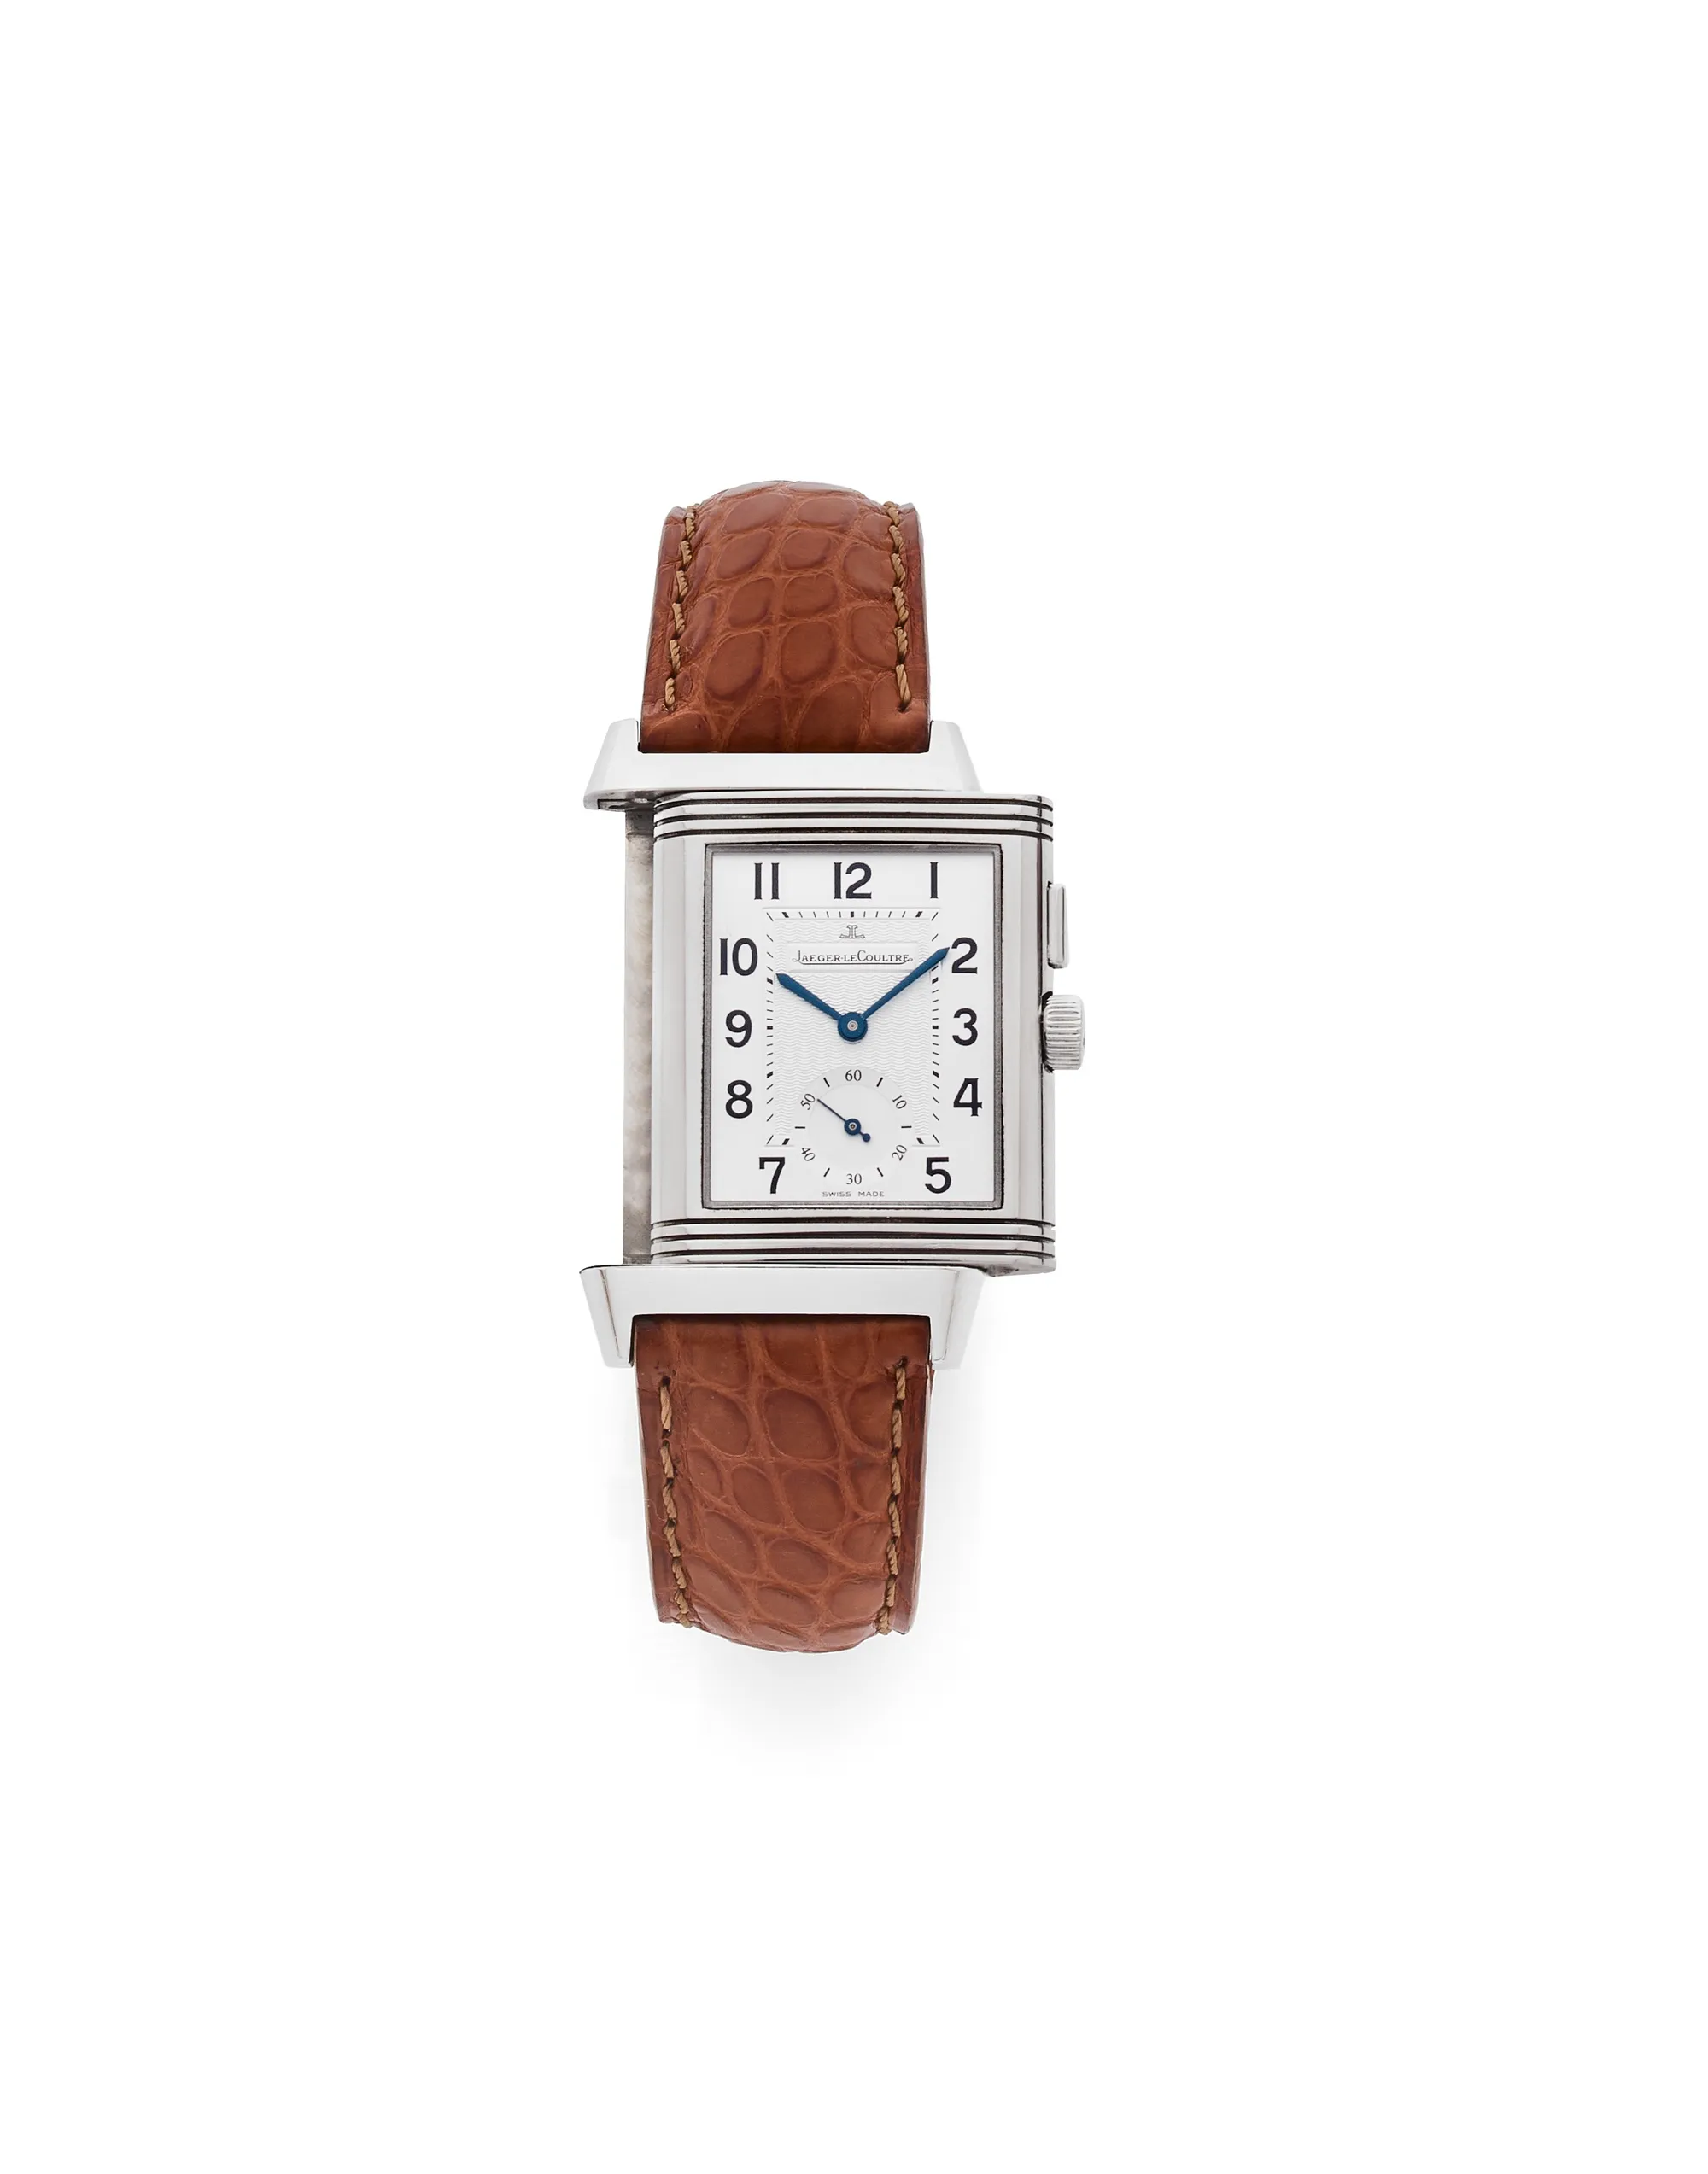 Jaeger-LeCoultre Reverso Duoface 272.8.54 26mm Stainless steel Silver